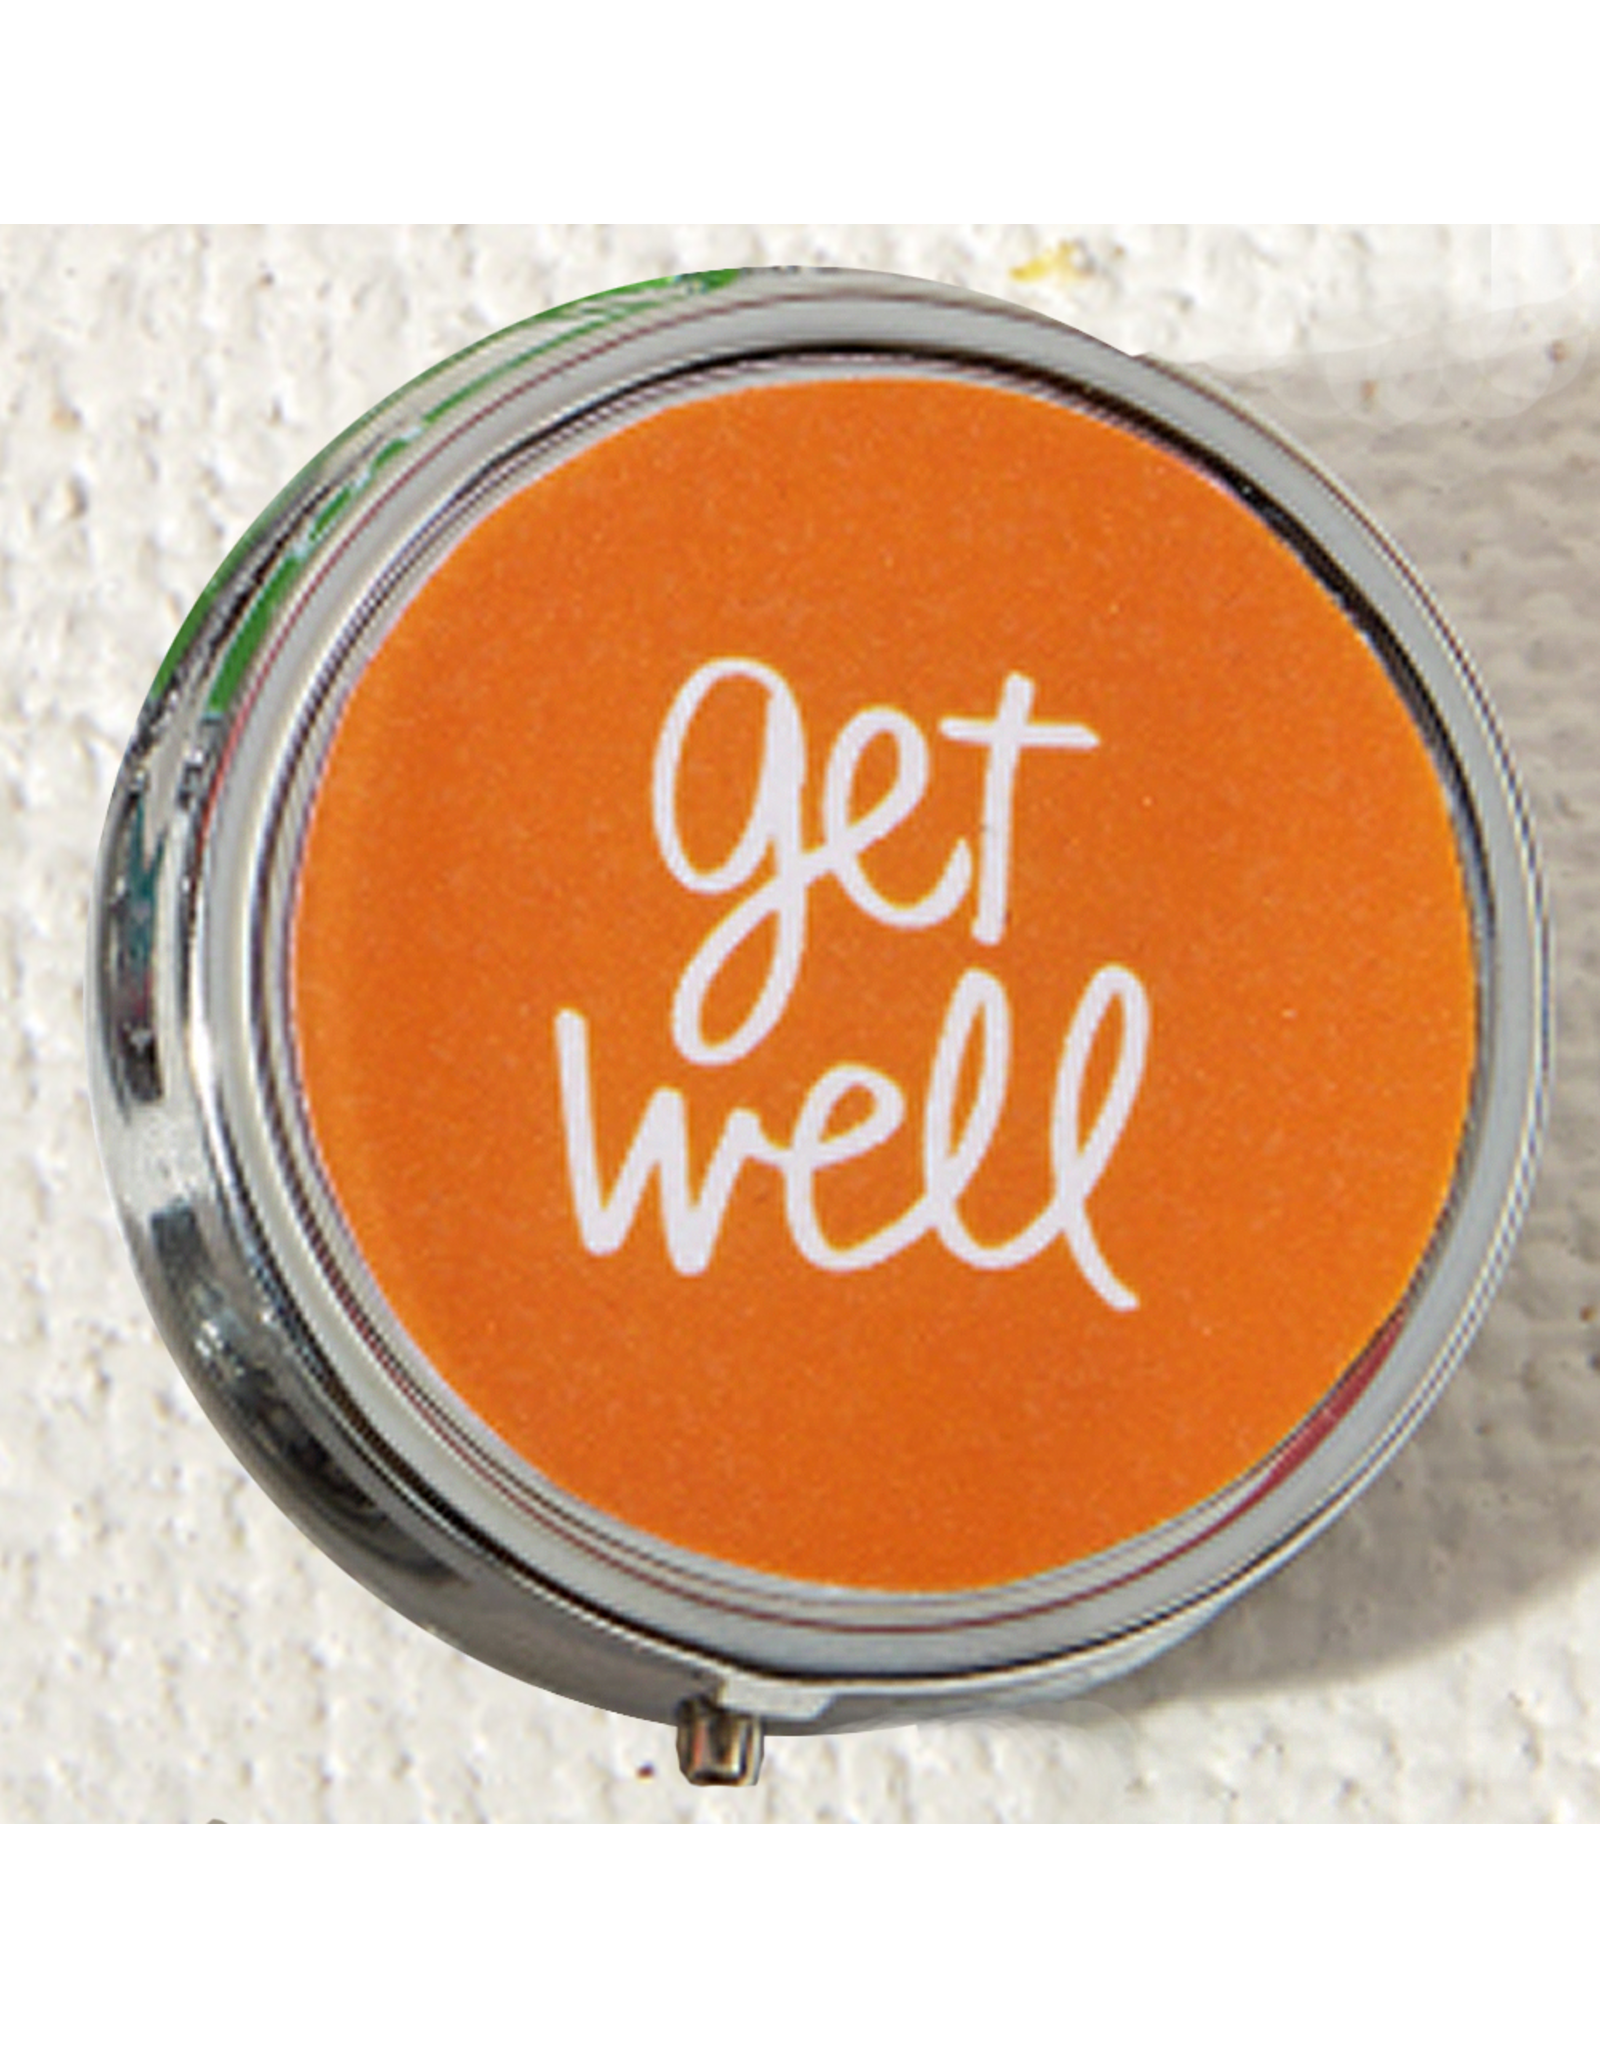 Twos Company Pillboxes Round Orange Pill Box With Sentiment Get Well